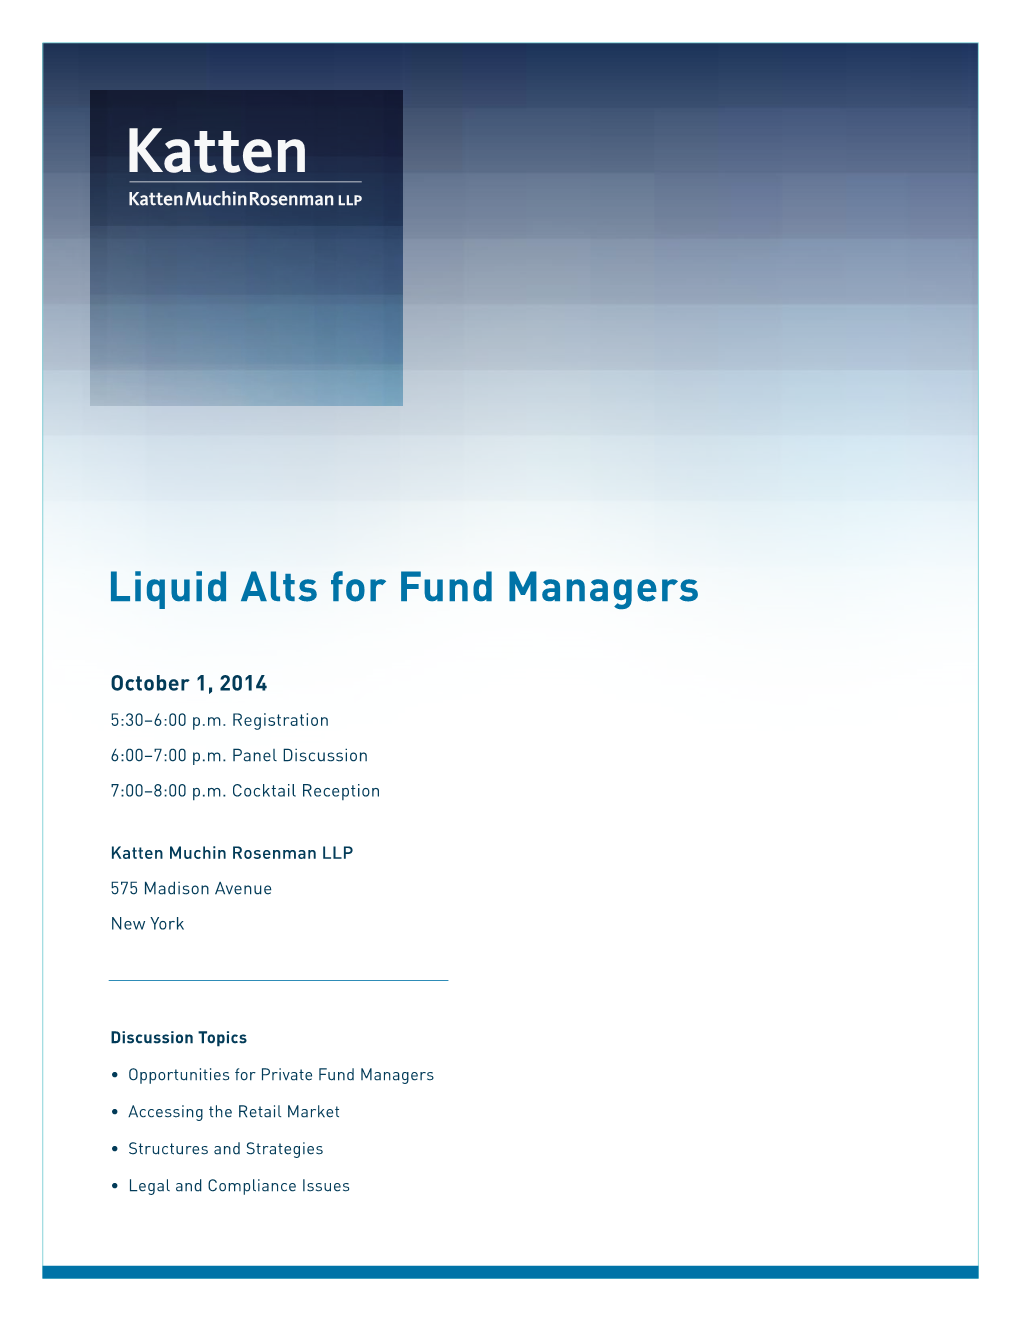 Liquid Alts for Fund Managers